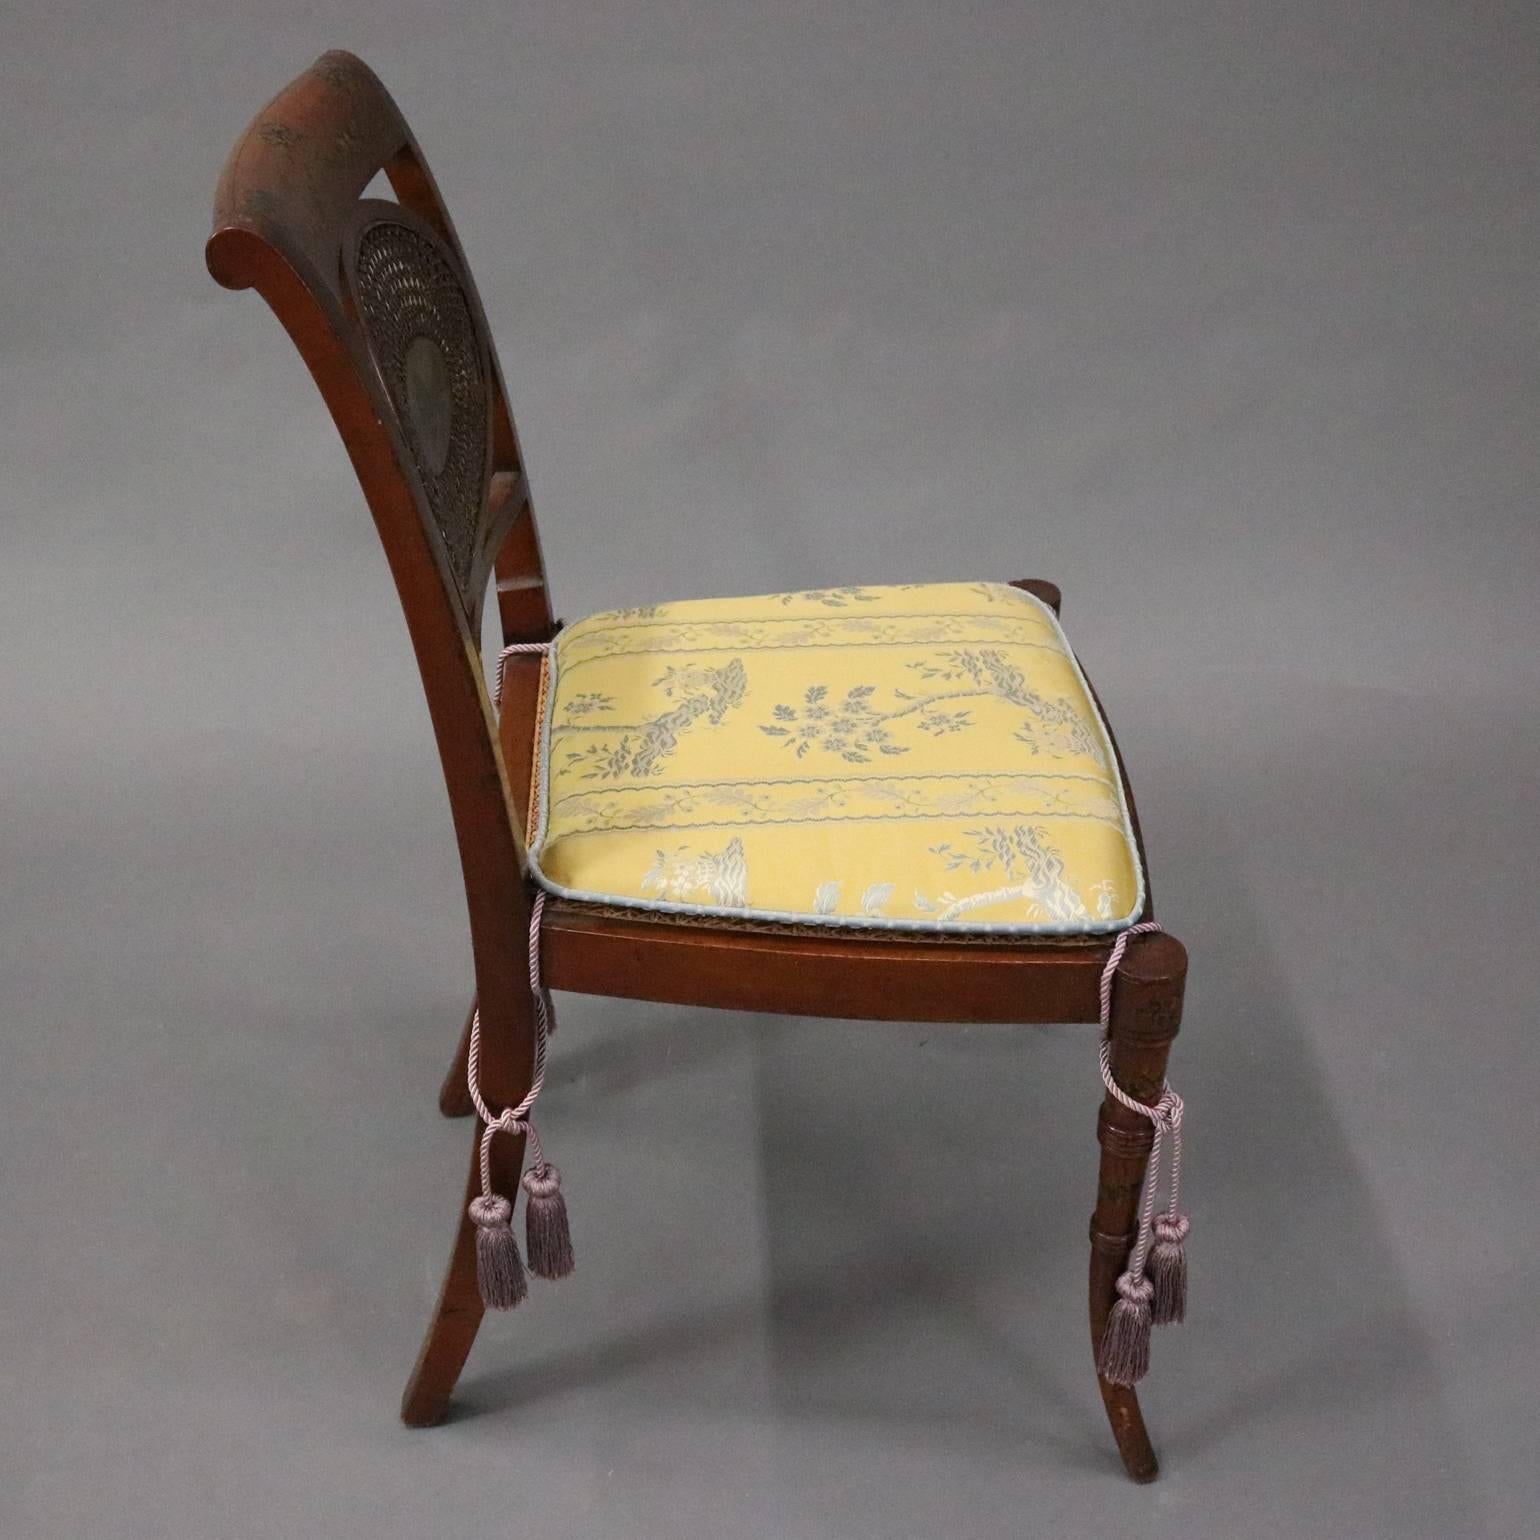 Antique English Regency side chair features mahogany frame with hand-painted floral decoration, caned seat and back with central medallion of landscape 
river scene, circa 1890

Measures: 33.5" H x 19" W x 16" D, 17" seat